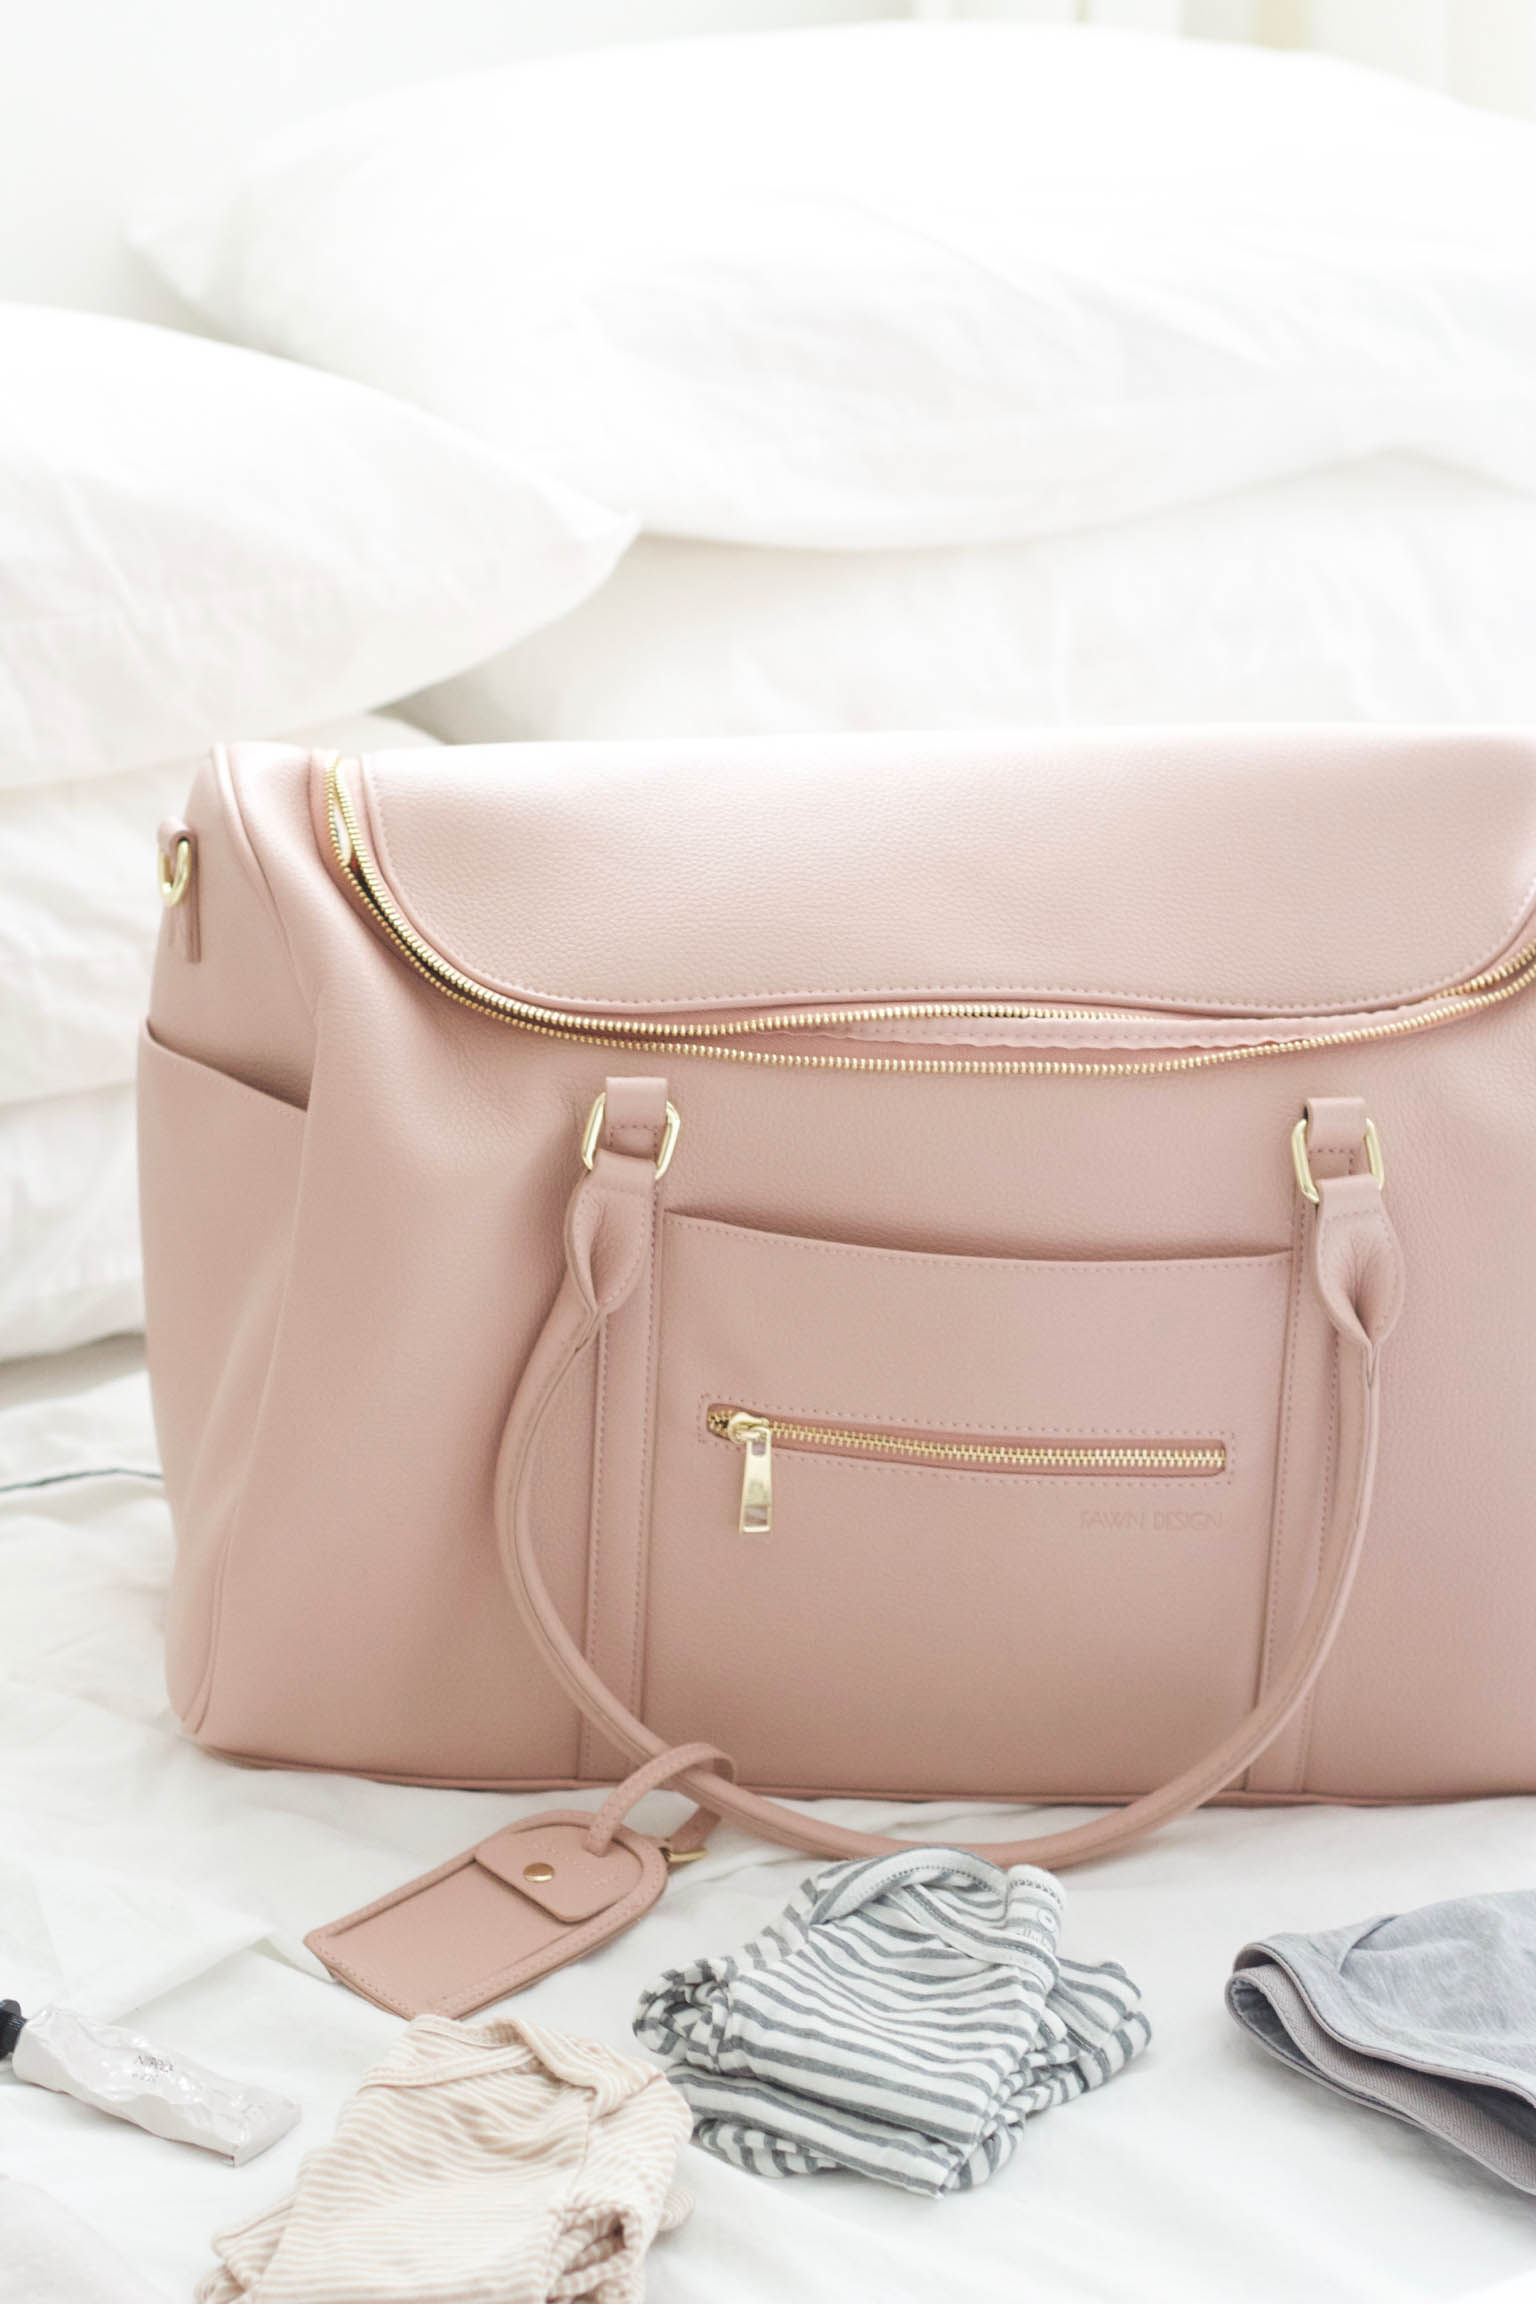 From Diaper Bags to Luxury Bags: How Fawn Design Transformed their